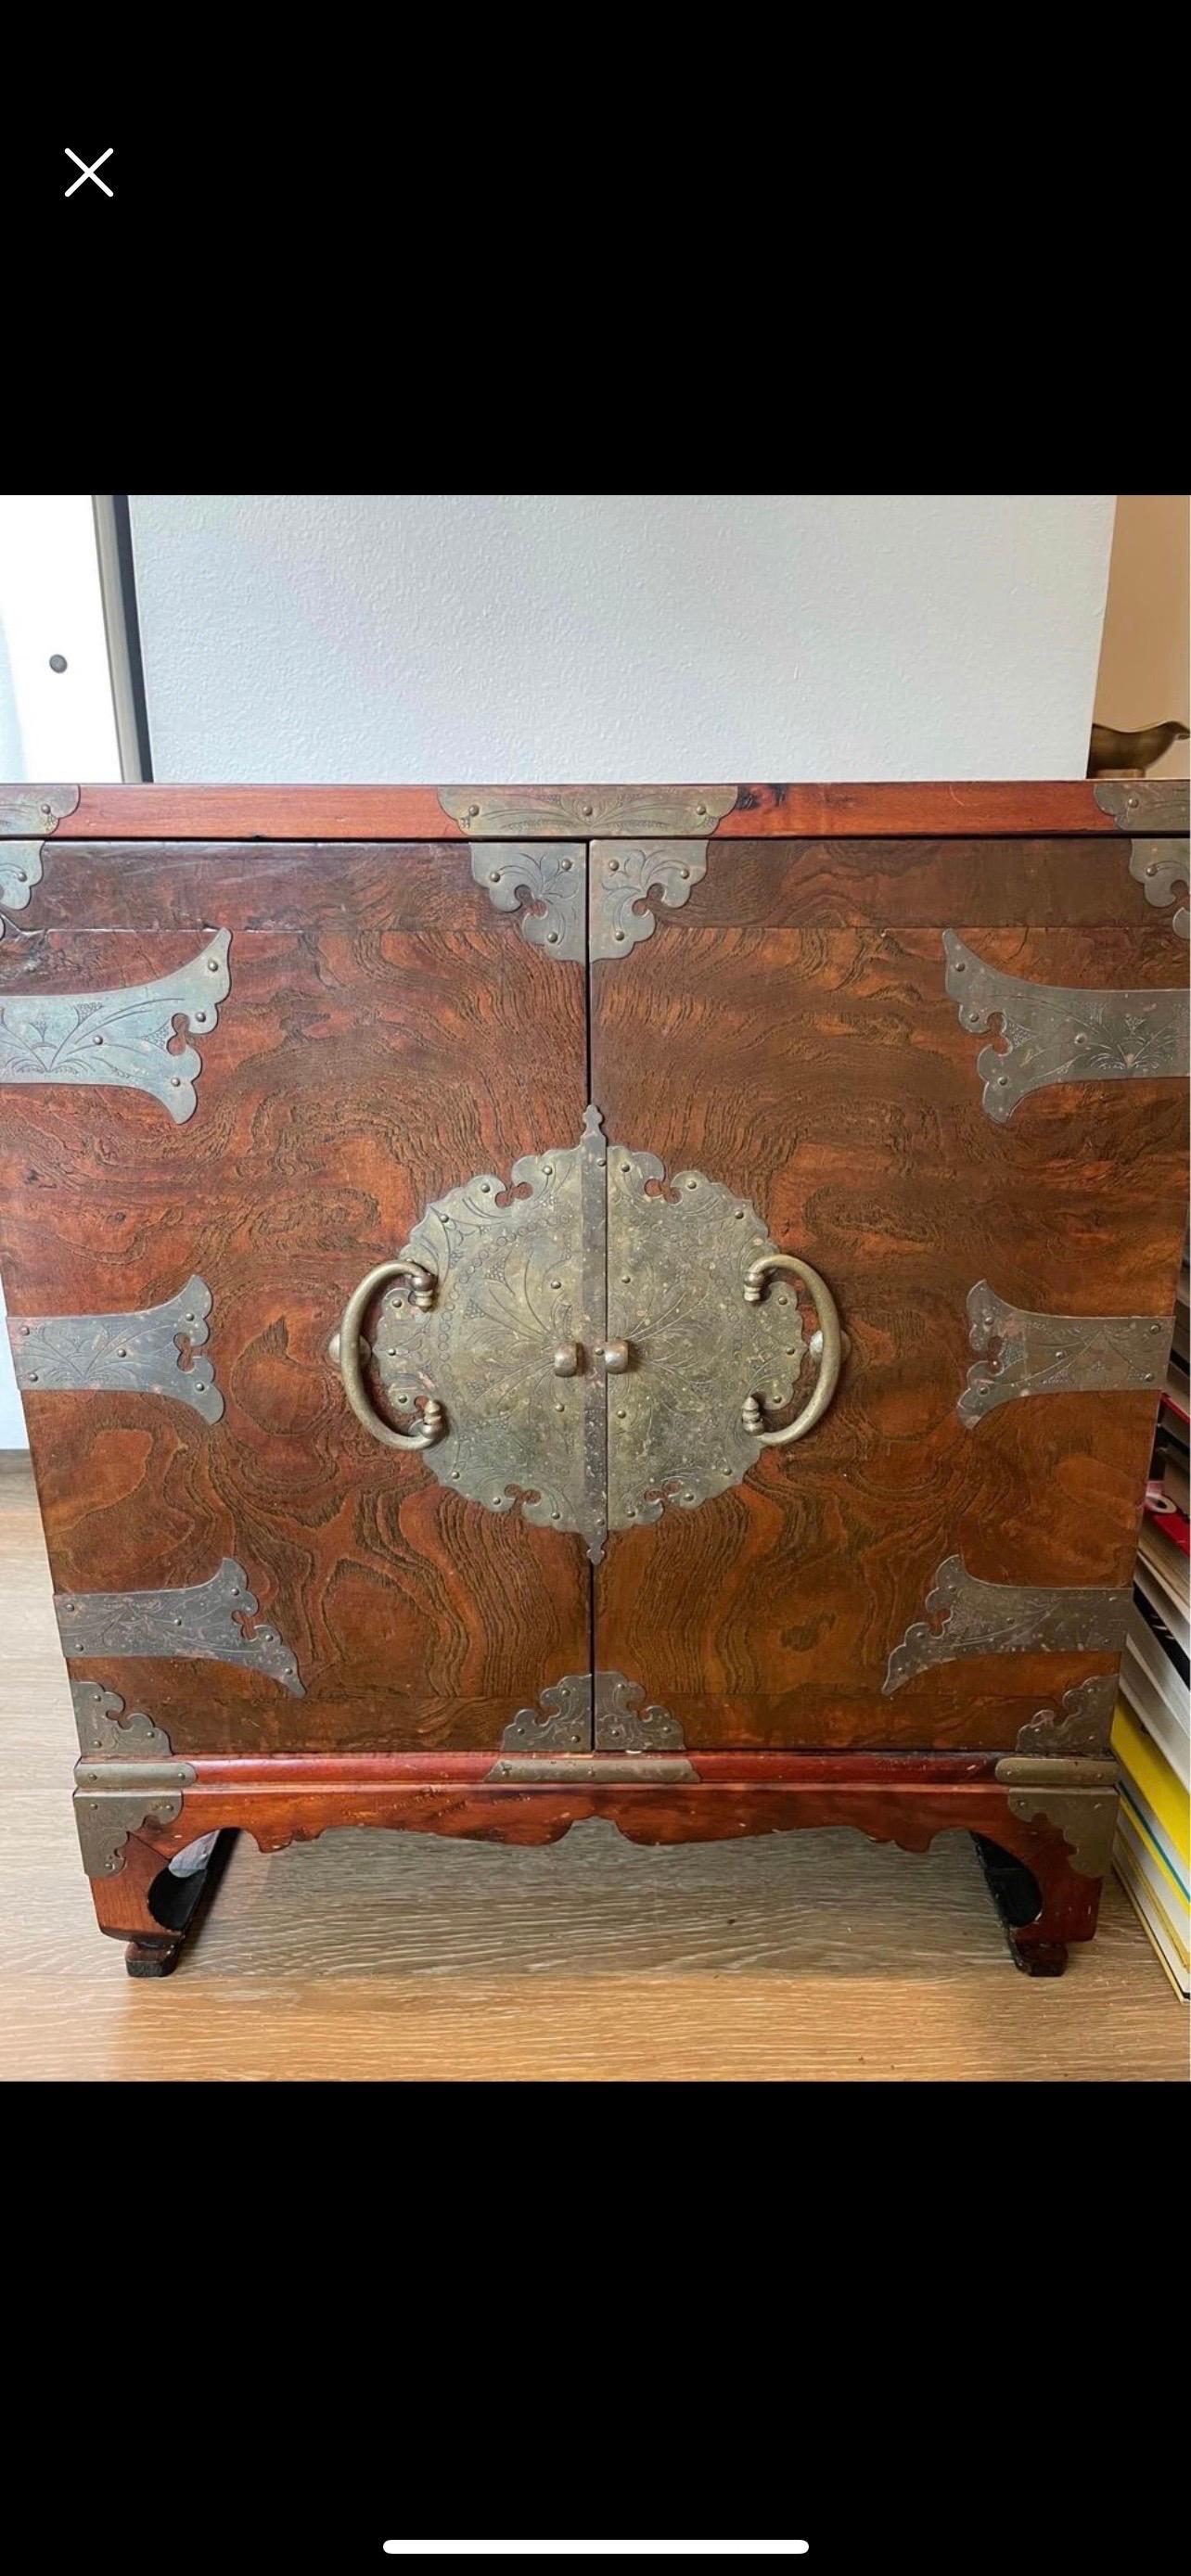 Amazing old cabinet. Beautiful burl wood, metal fixture, even a fish design lock. Looks to be Japanese characters on the back.
Measures: 22” wide
25” tall
12” deep.